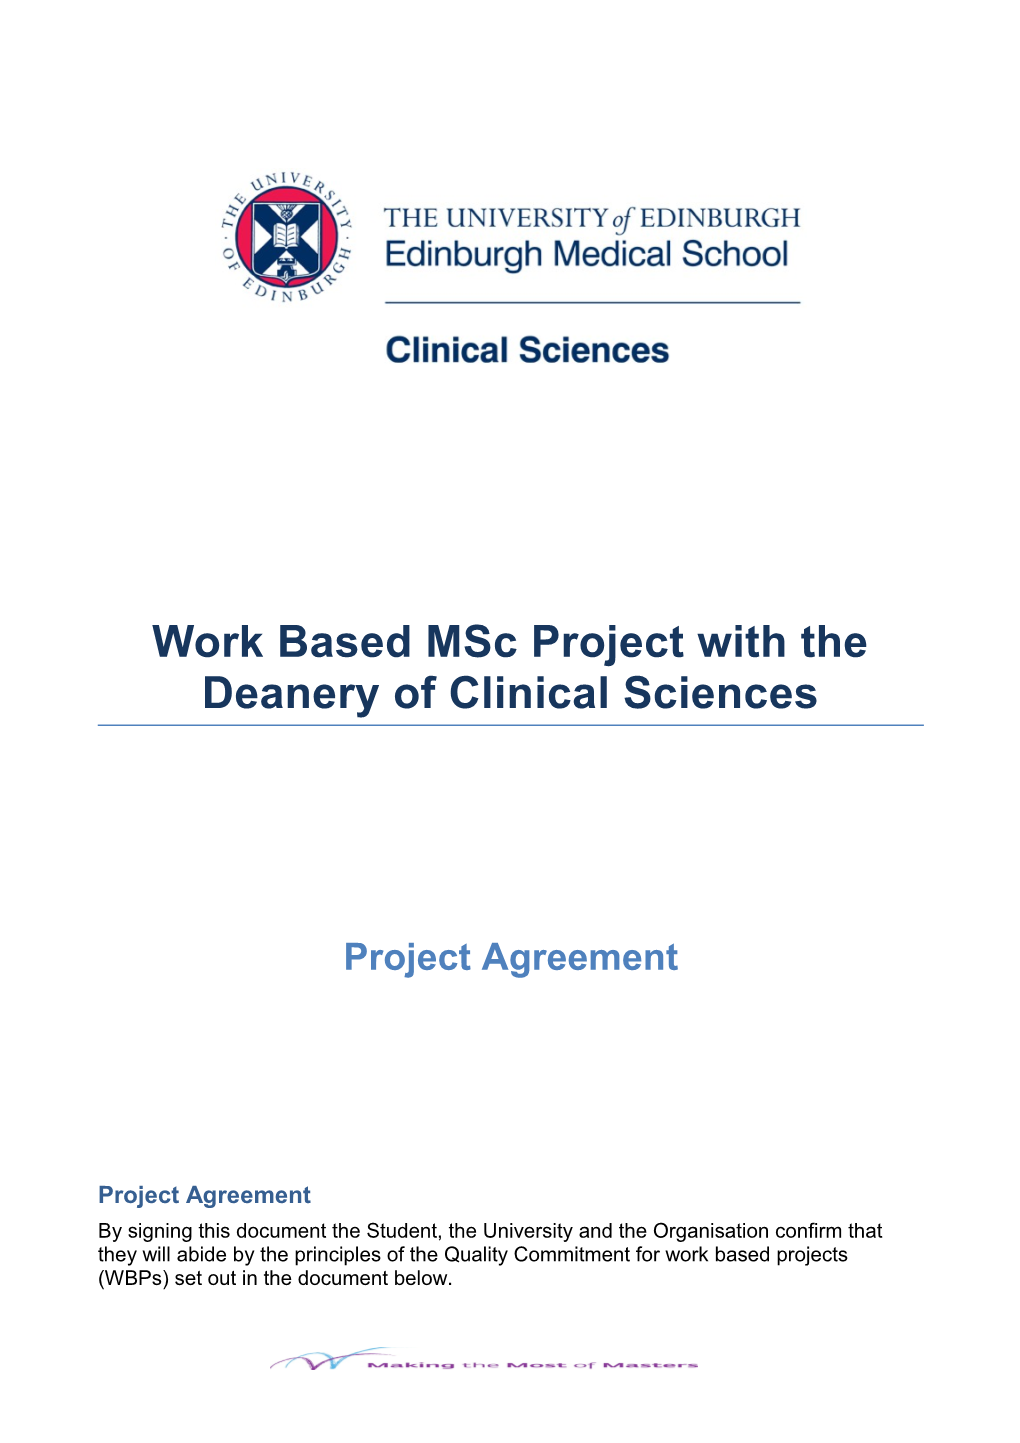 Work Based Msc Project with the Deanery of Clinical Sciences